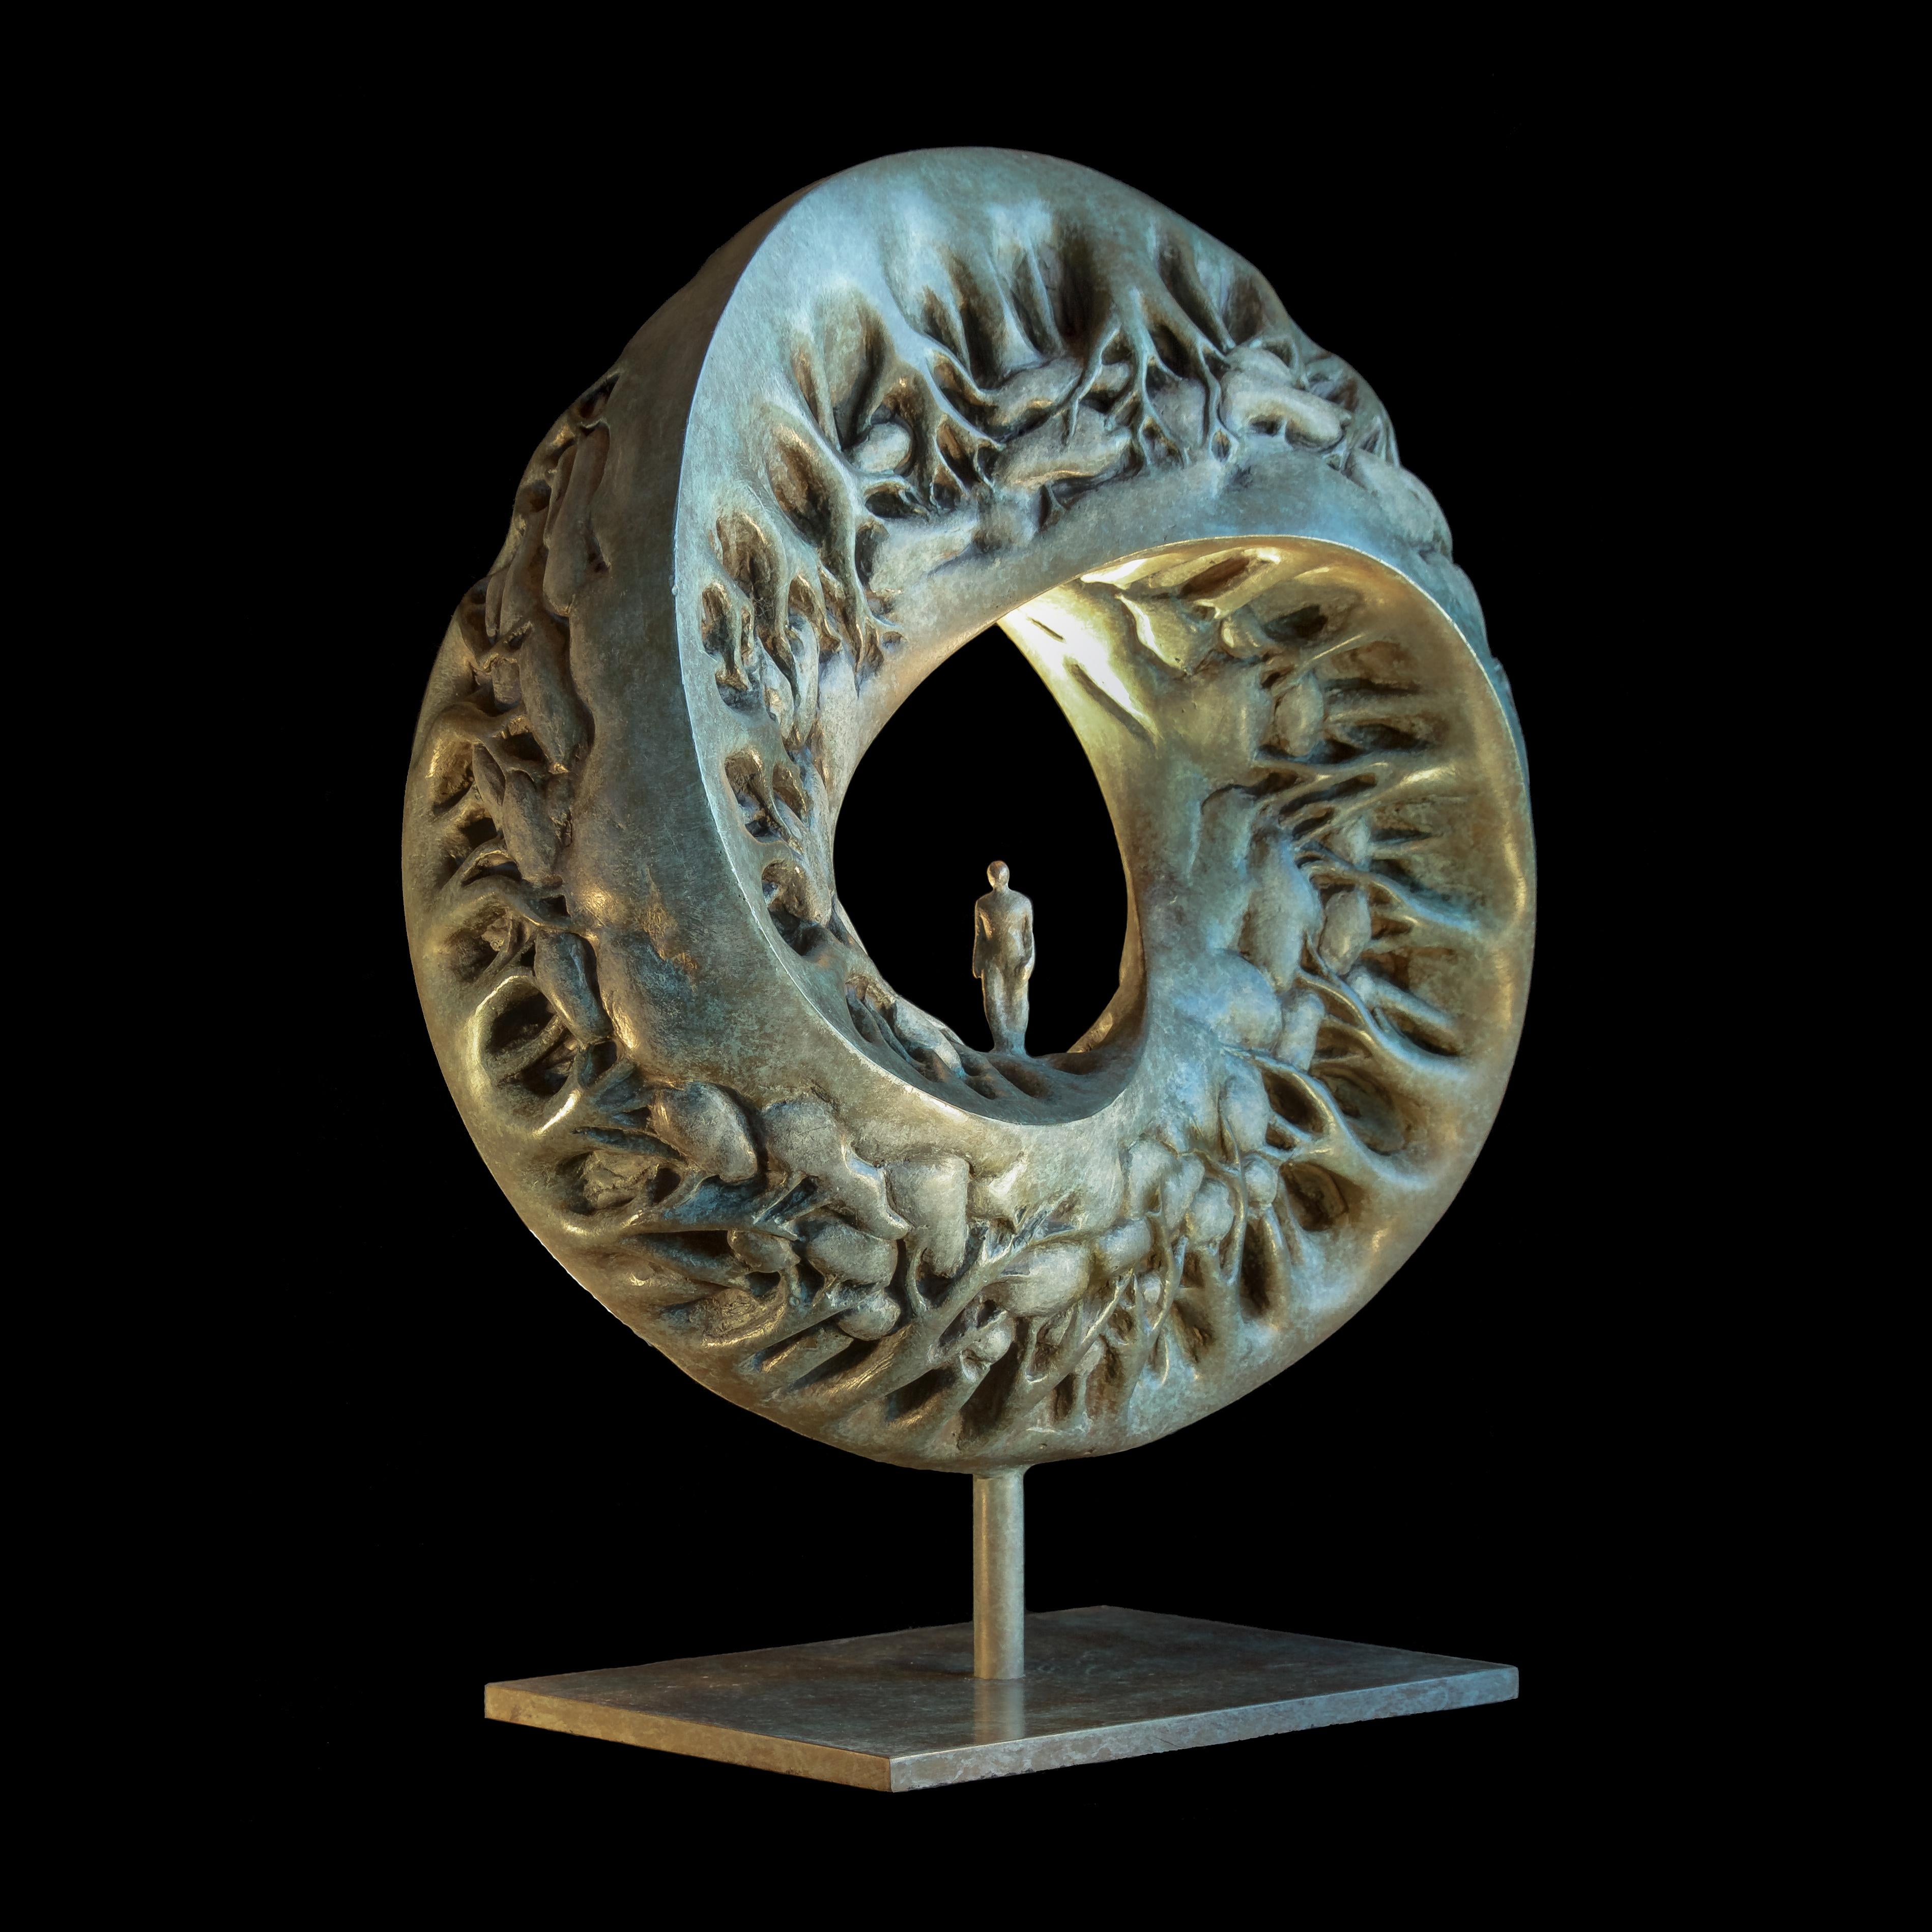 This circular sculpture depicts a small human walking inside a three-sided polygon Möbius band made of trees.

Passionate about the spirit, with her timeless and universal expression in the heart of the human condition, the artist Isabelle Jeandot